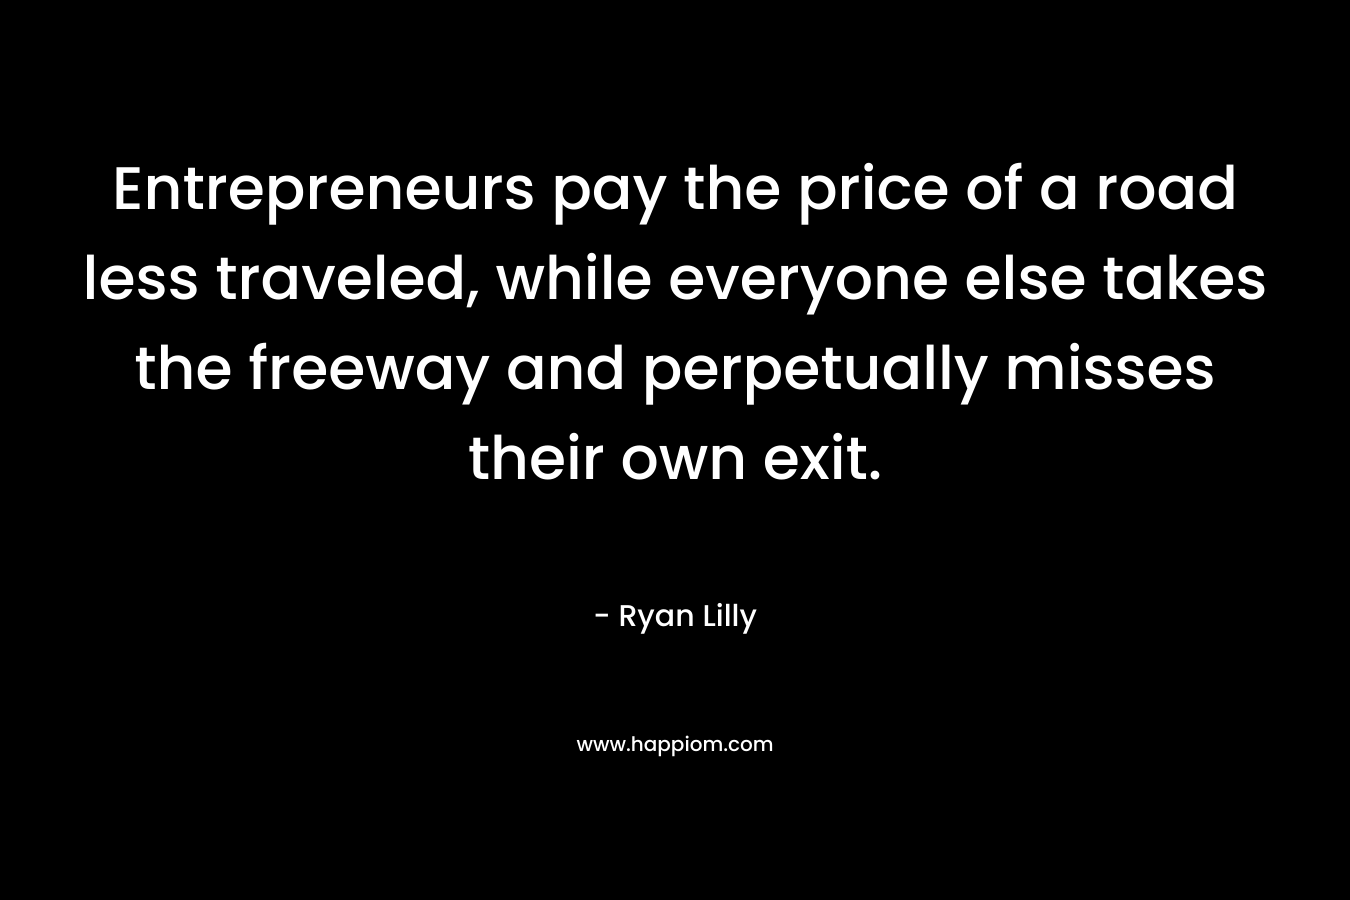 Entrepreneurs pay the price of a road less traveled, while everyone else takes the freeway and perpetually misses their own exit.